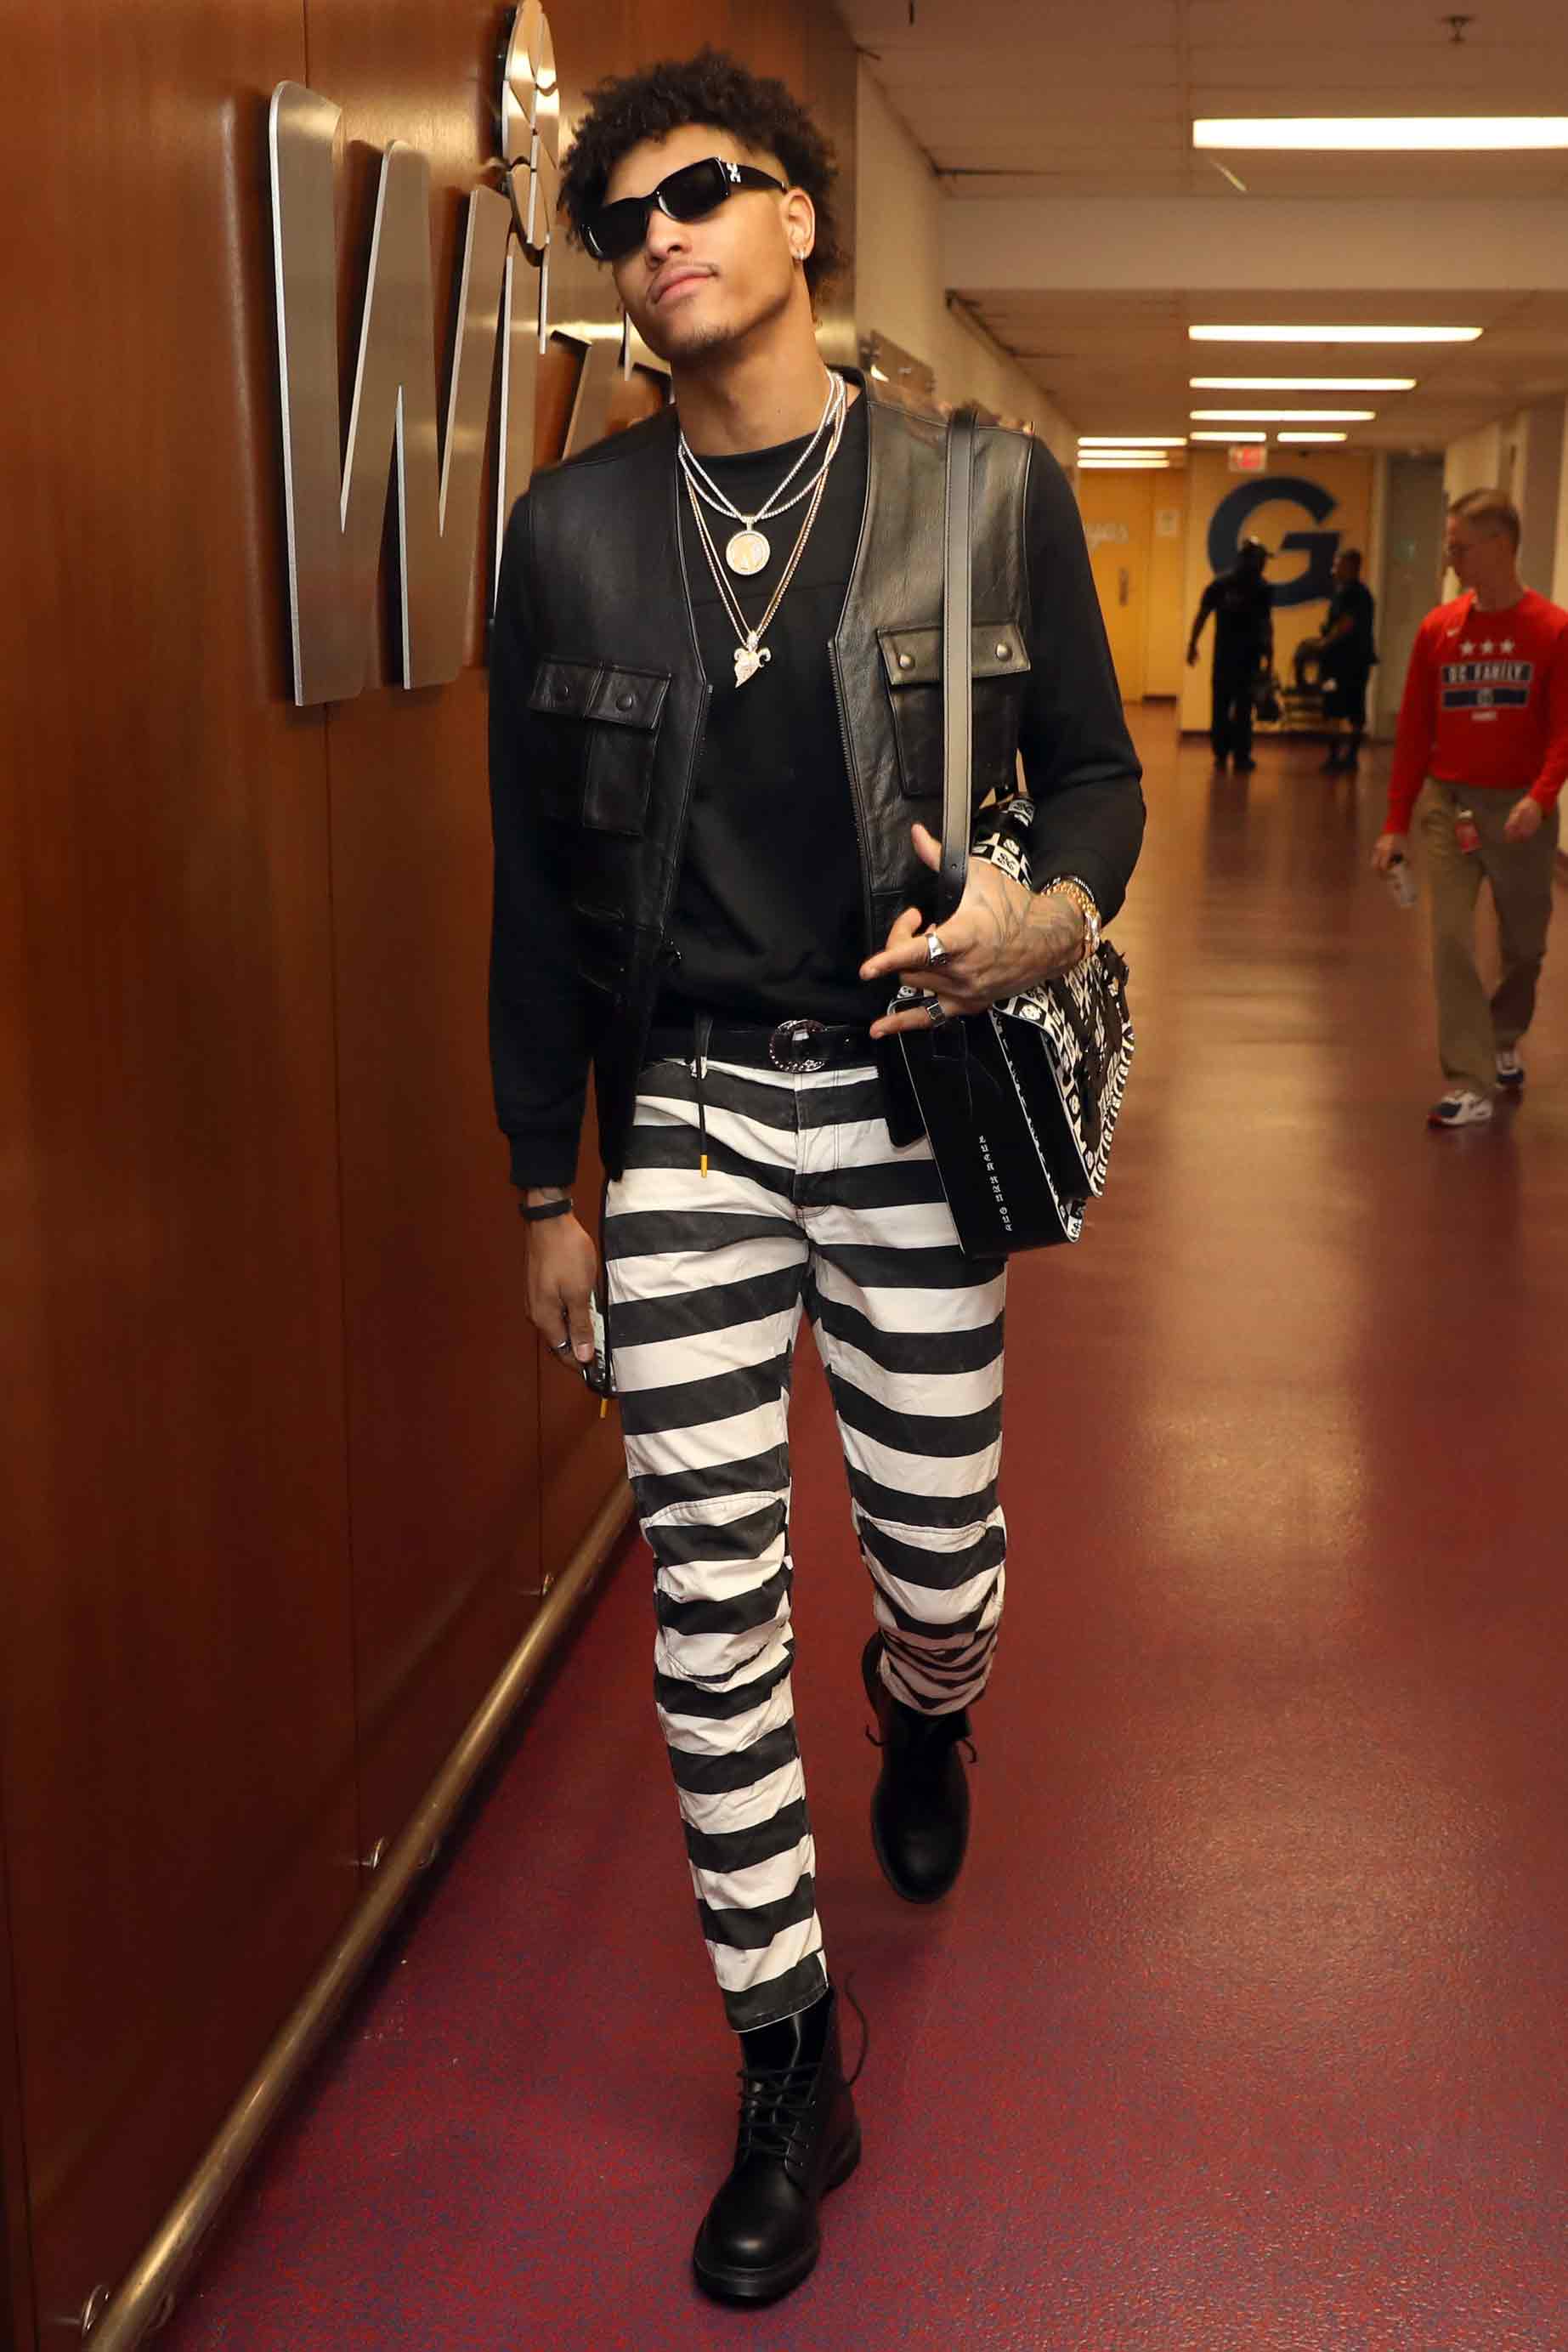 Kelly Oubre  Streetwear men outfits, Kelly oubre, Kelly oubre jr